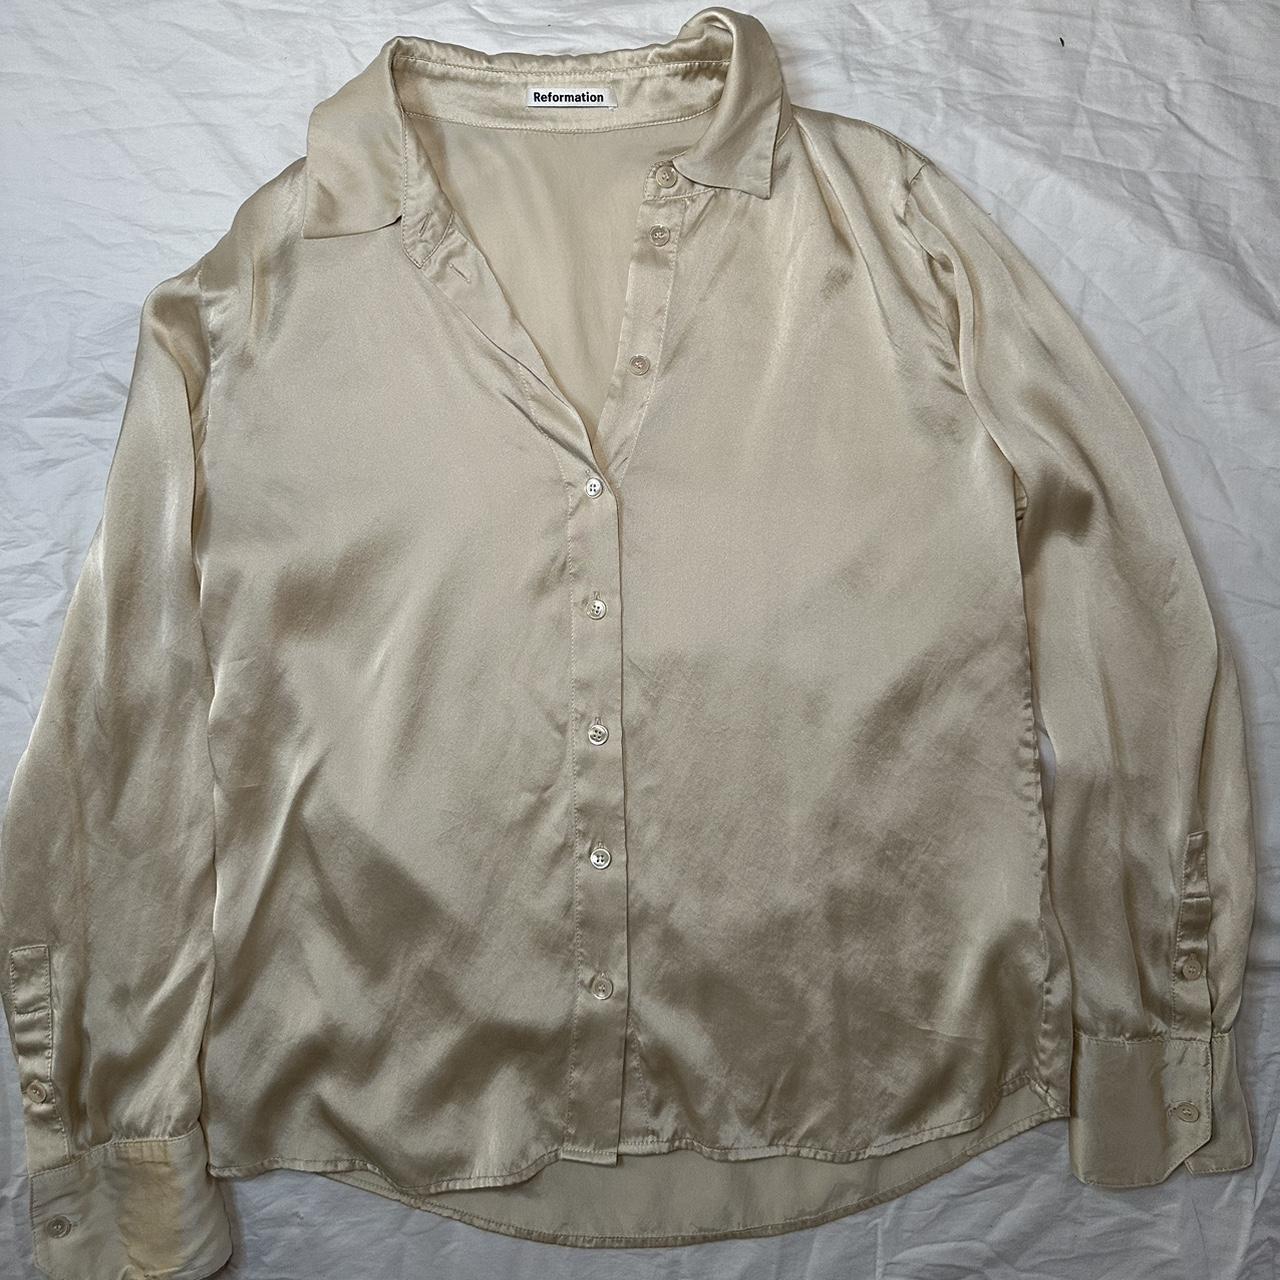 Reformation Women's Cream and Tan Blouse (5)